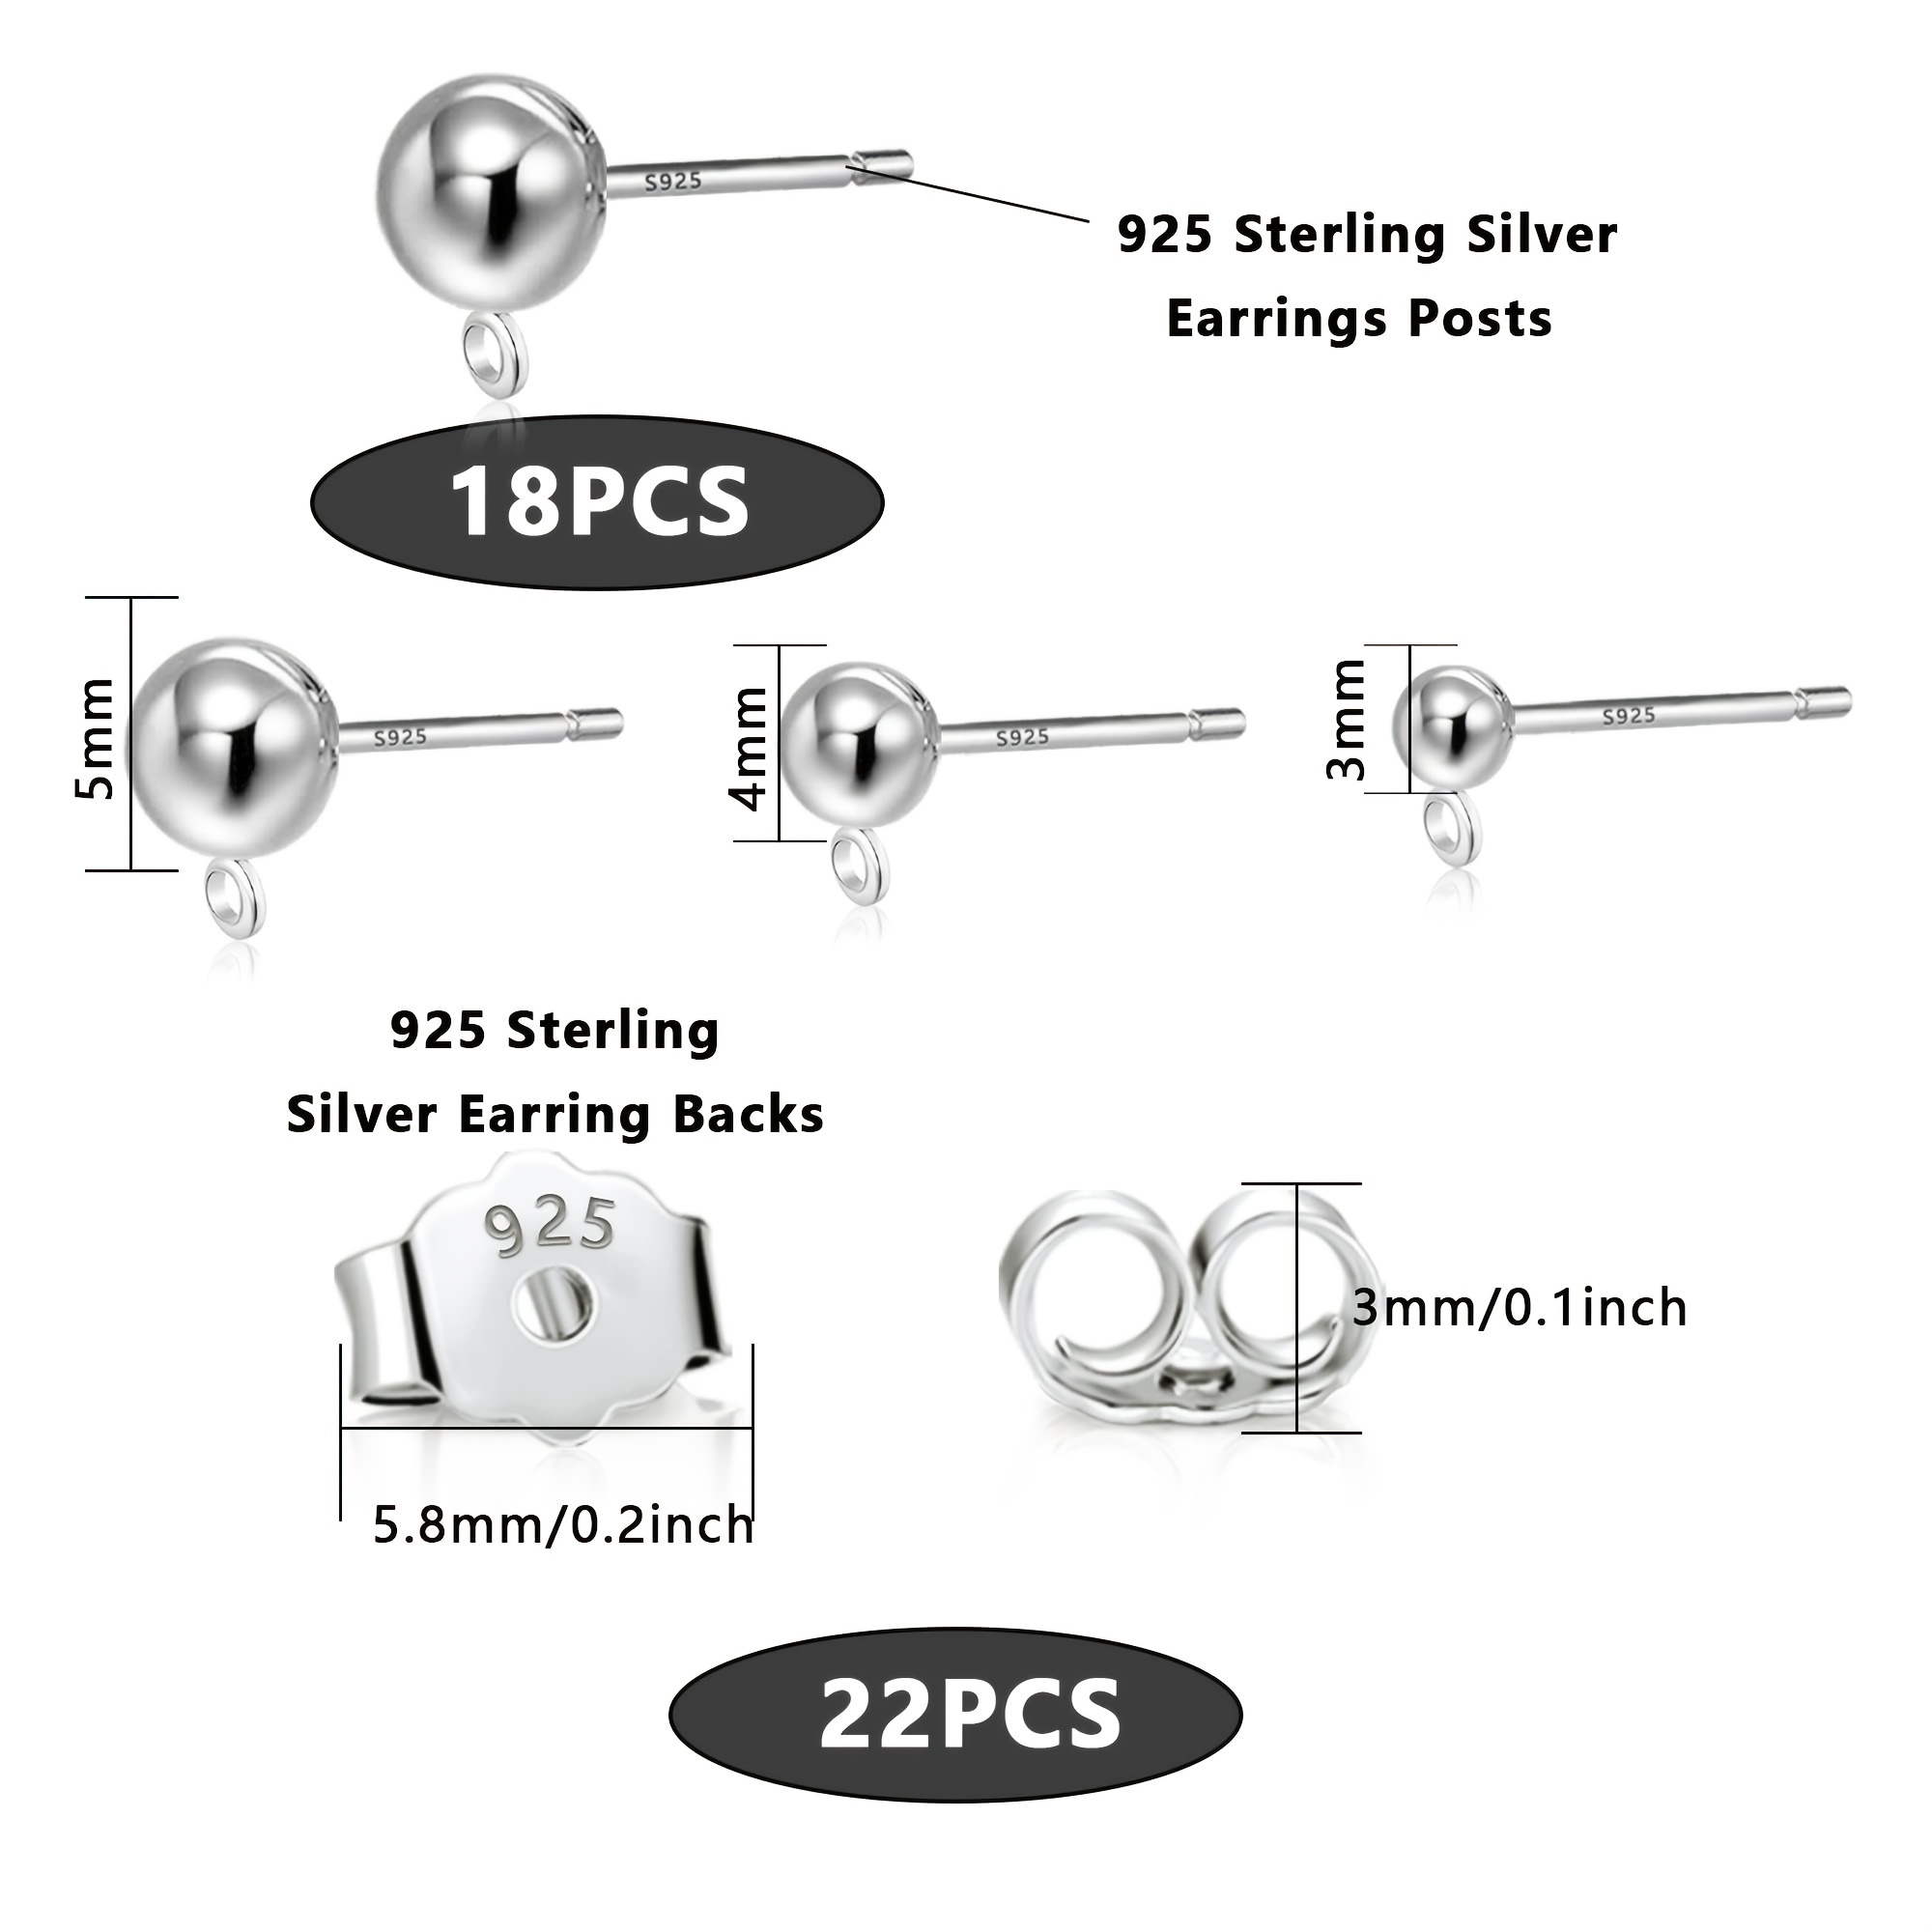 Butterfly Earring Backs, 925 Stering Silver Earring Backs Gold Plated  Earring Backs Replacements Hypoallergenic Secure Earring Backs for Studs  Posts